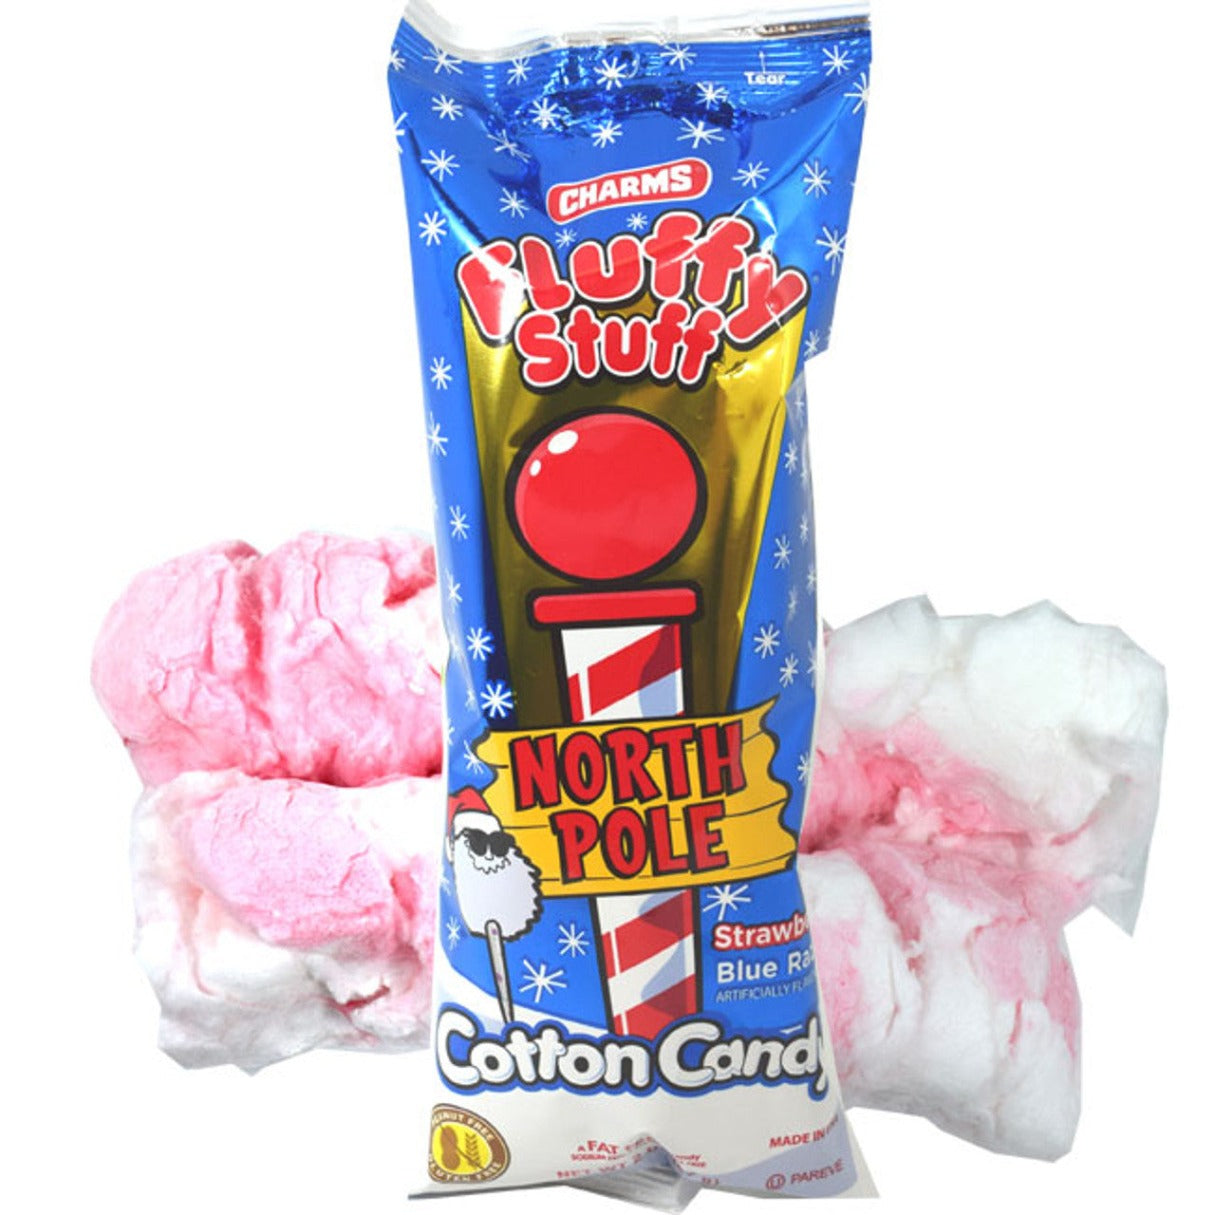 Charms Fluffy Stuff North Pole Cotton Candy Bag 2oz - 18ct